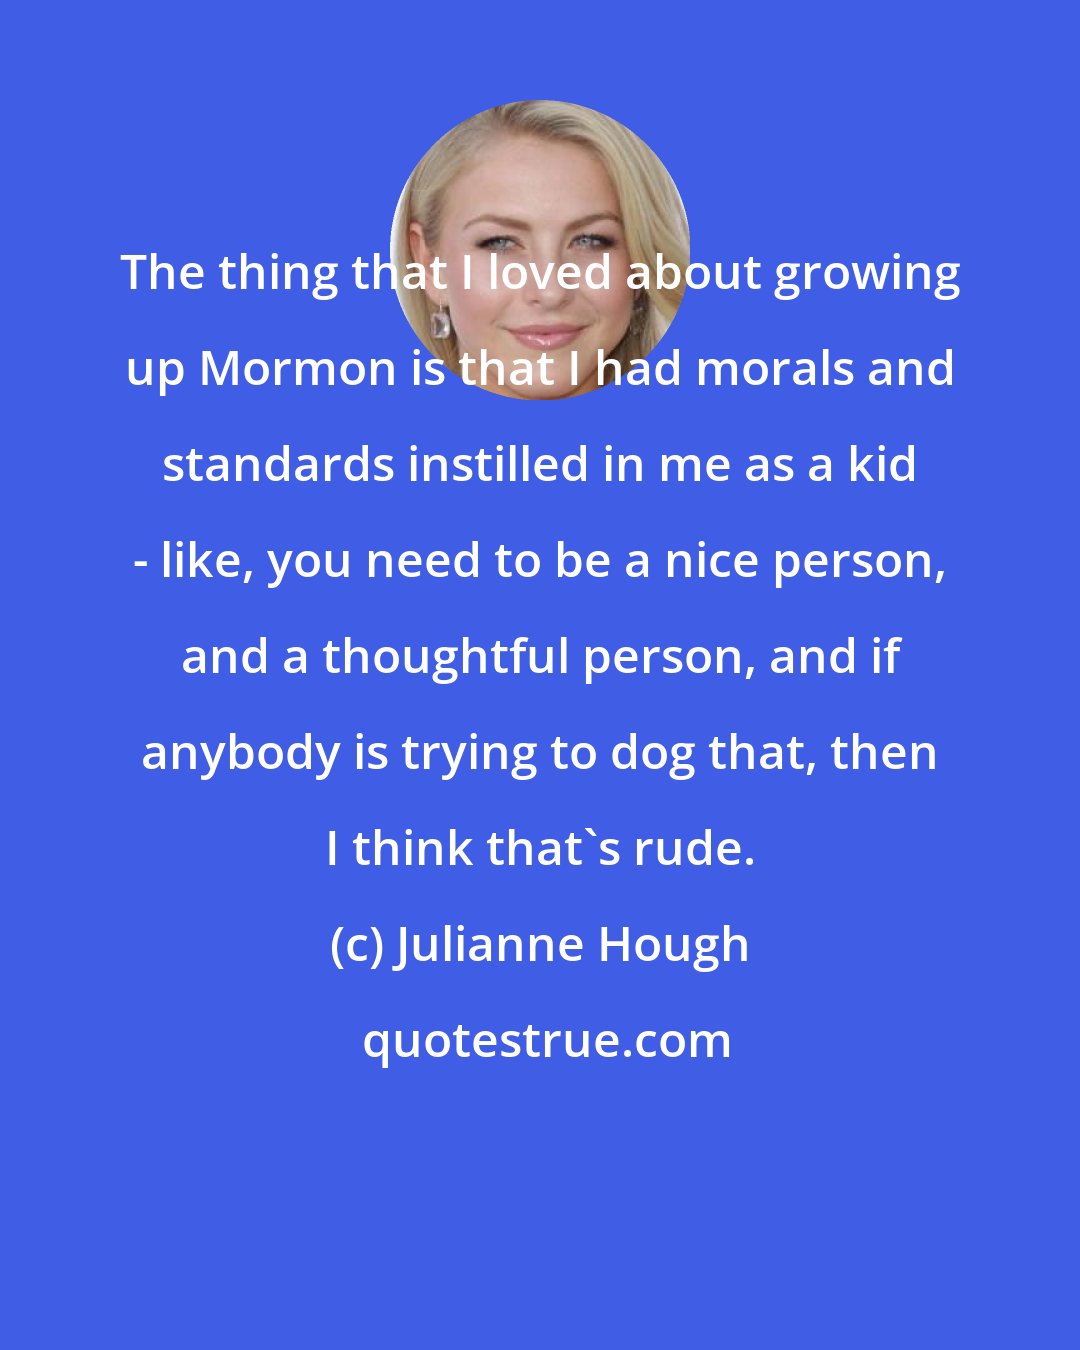 Julianne Hough: The thing that I loved about growing up Mormon is that I had morals and standards instilled in me as a kid - like, you need to be a nice person, and a thoughtful person, and if anybody is trying to dog that, then I think that's rude.